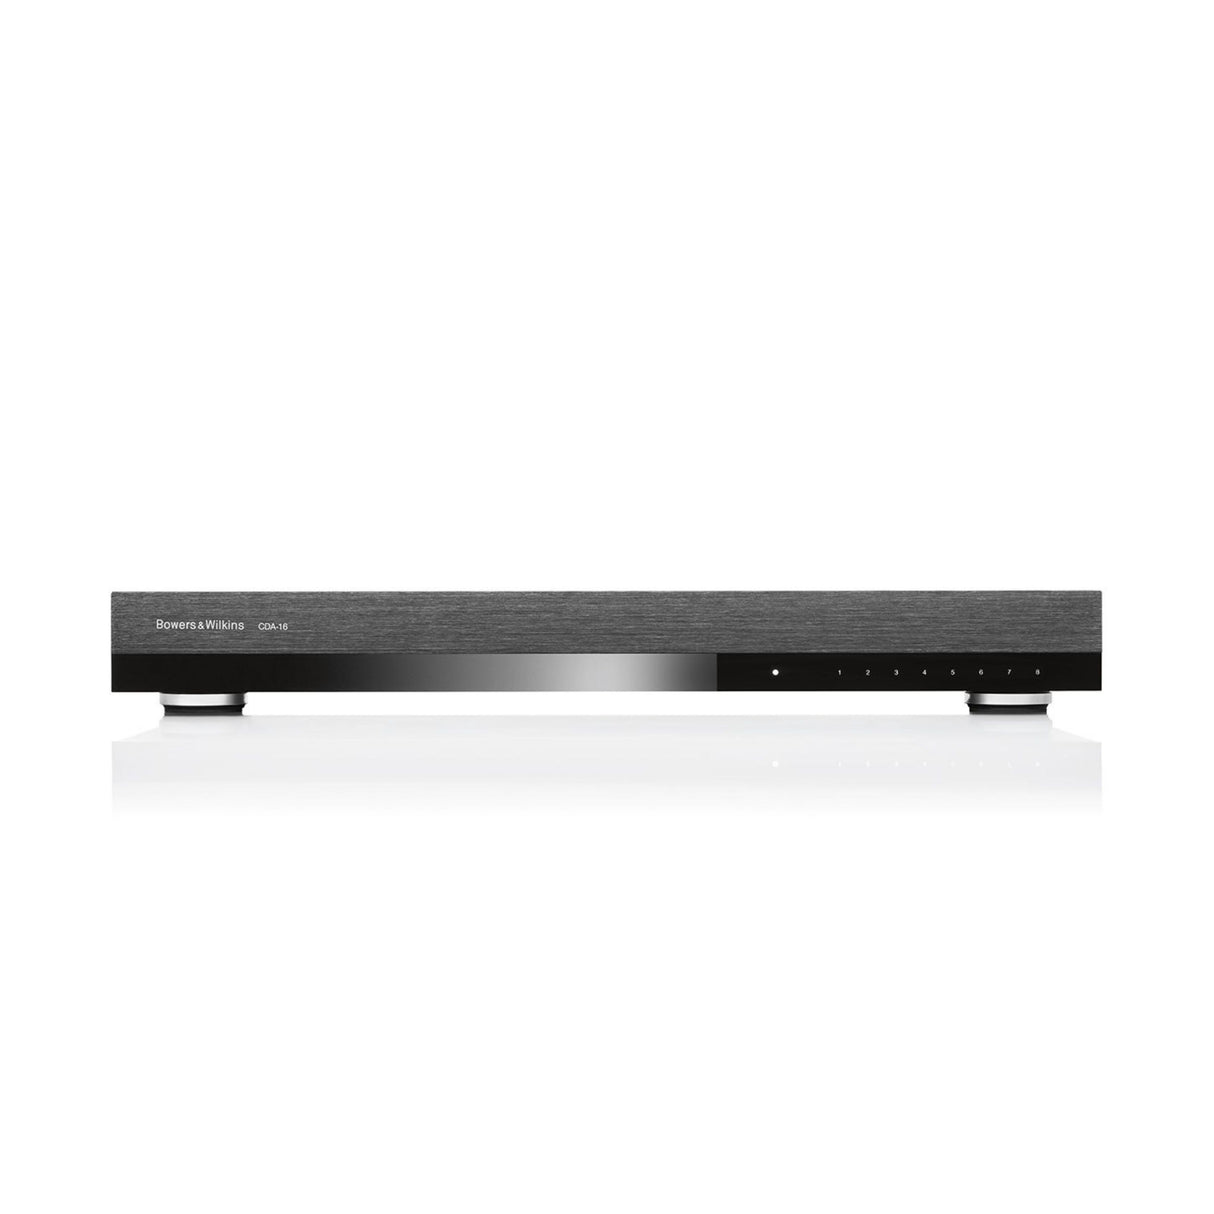 Bowers & Wilkins CDA-16 Distribution Power Amplifier with 16 Channels